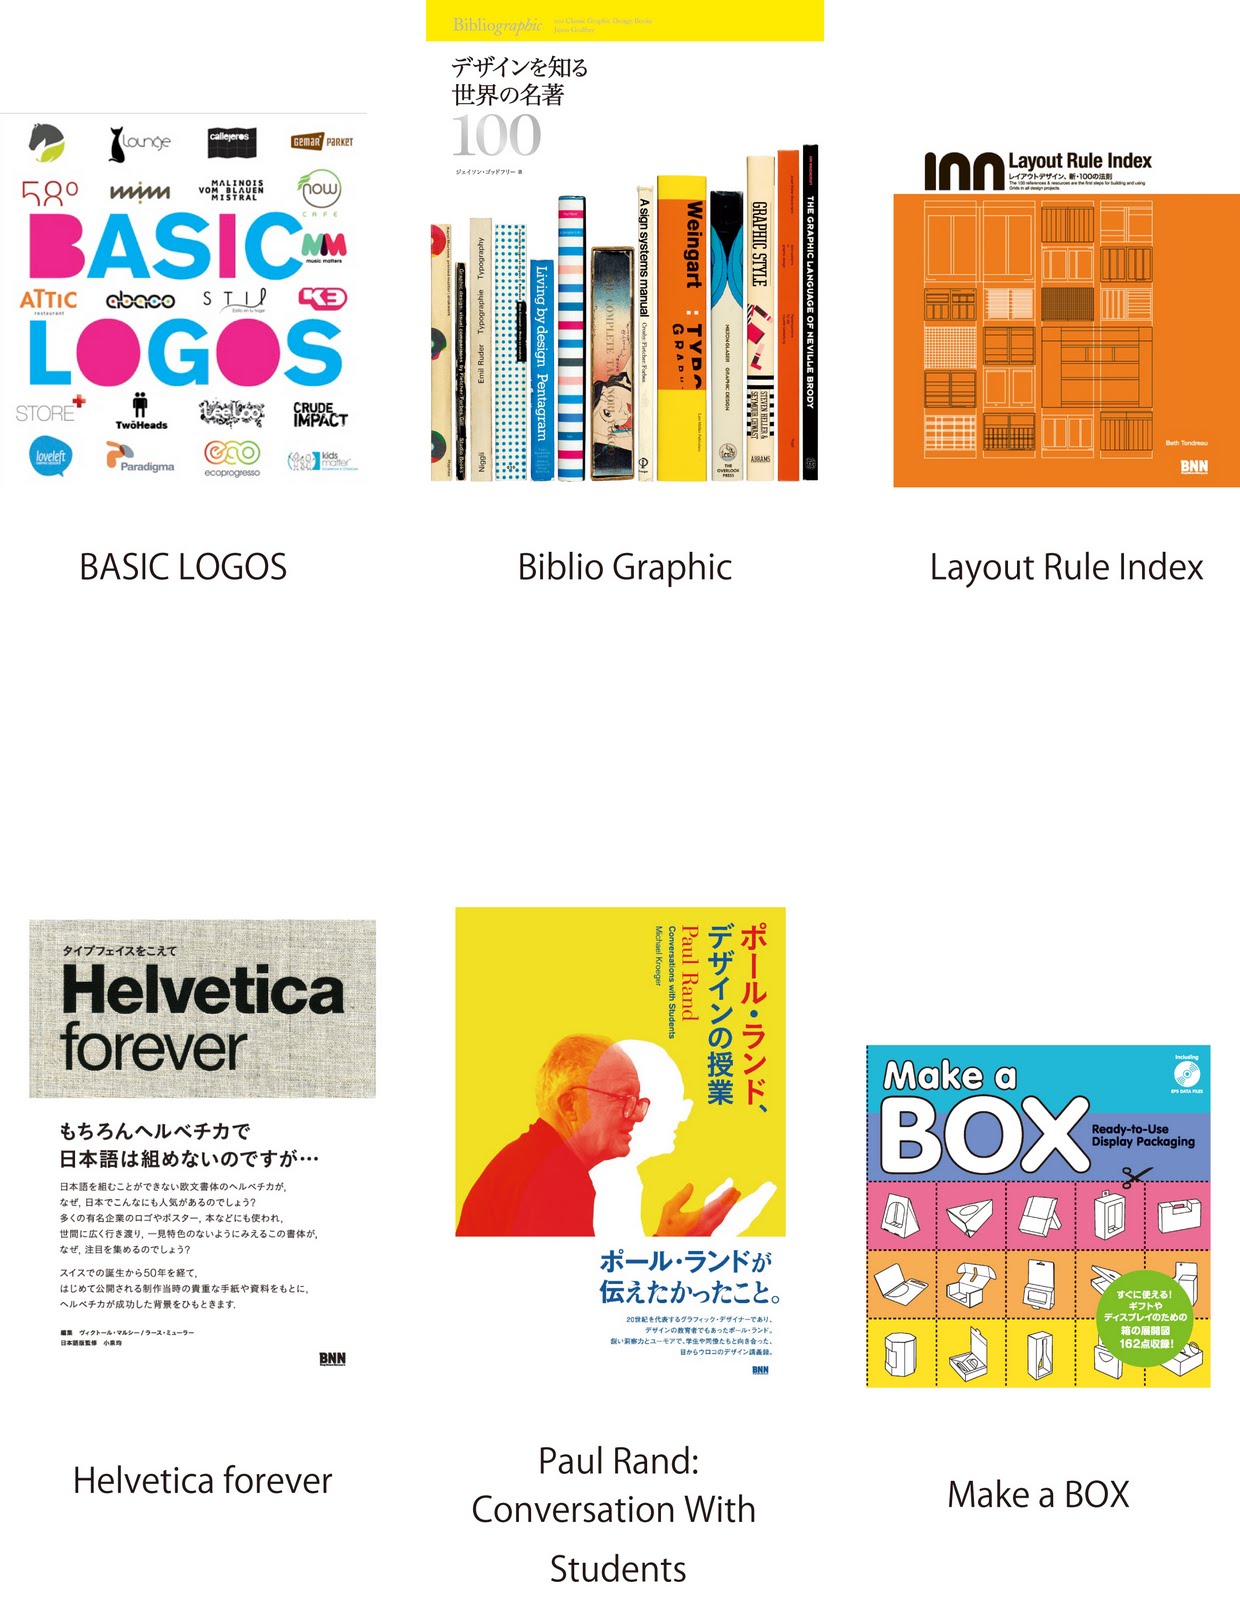 bnn books image search results